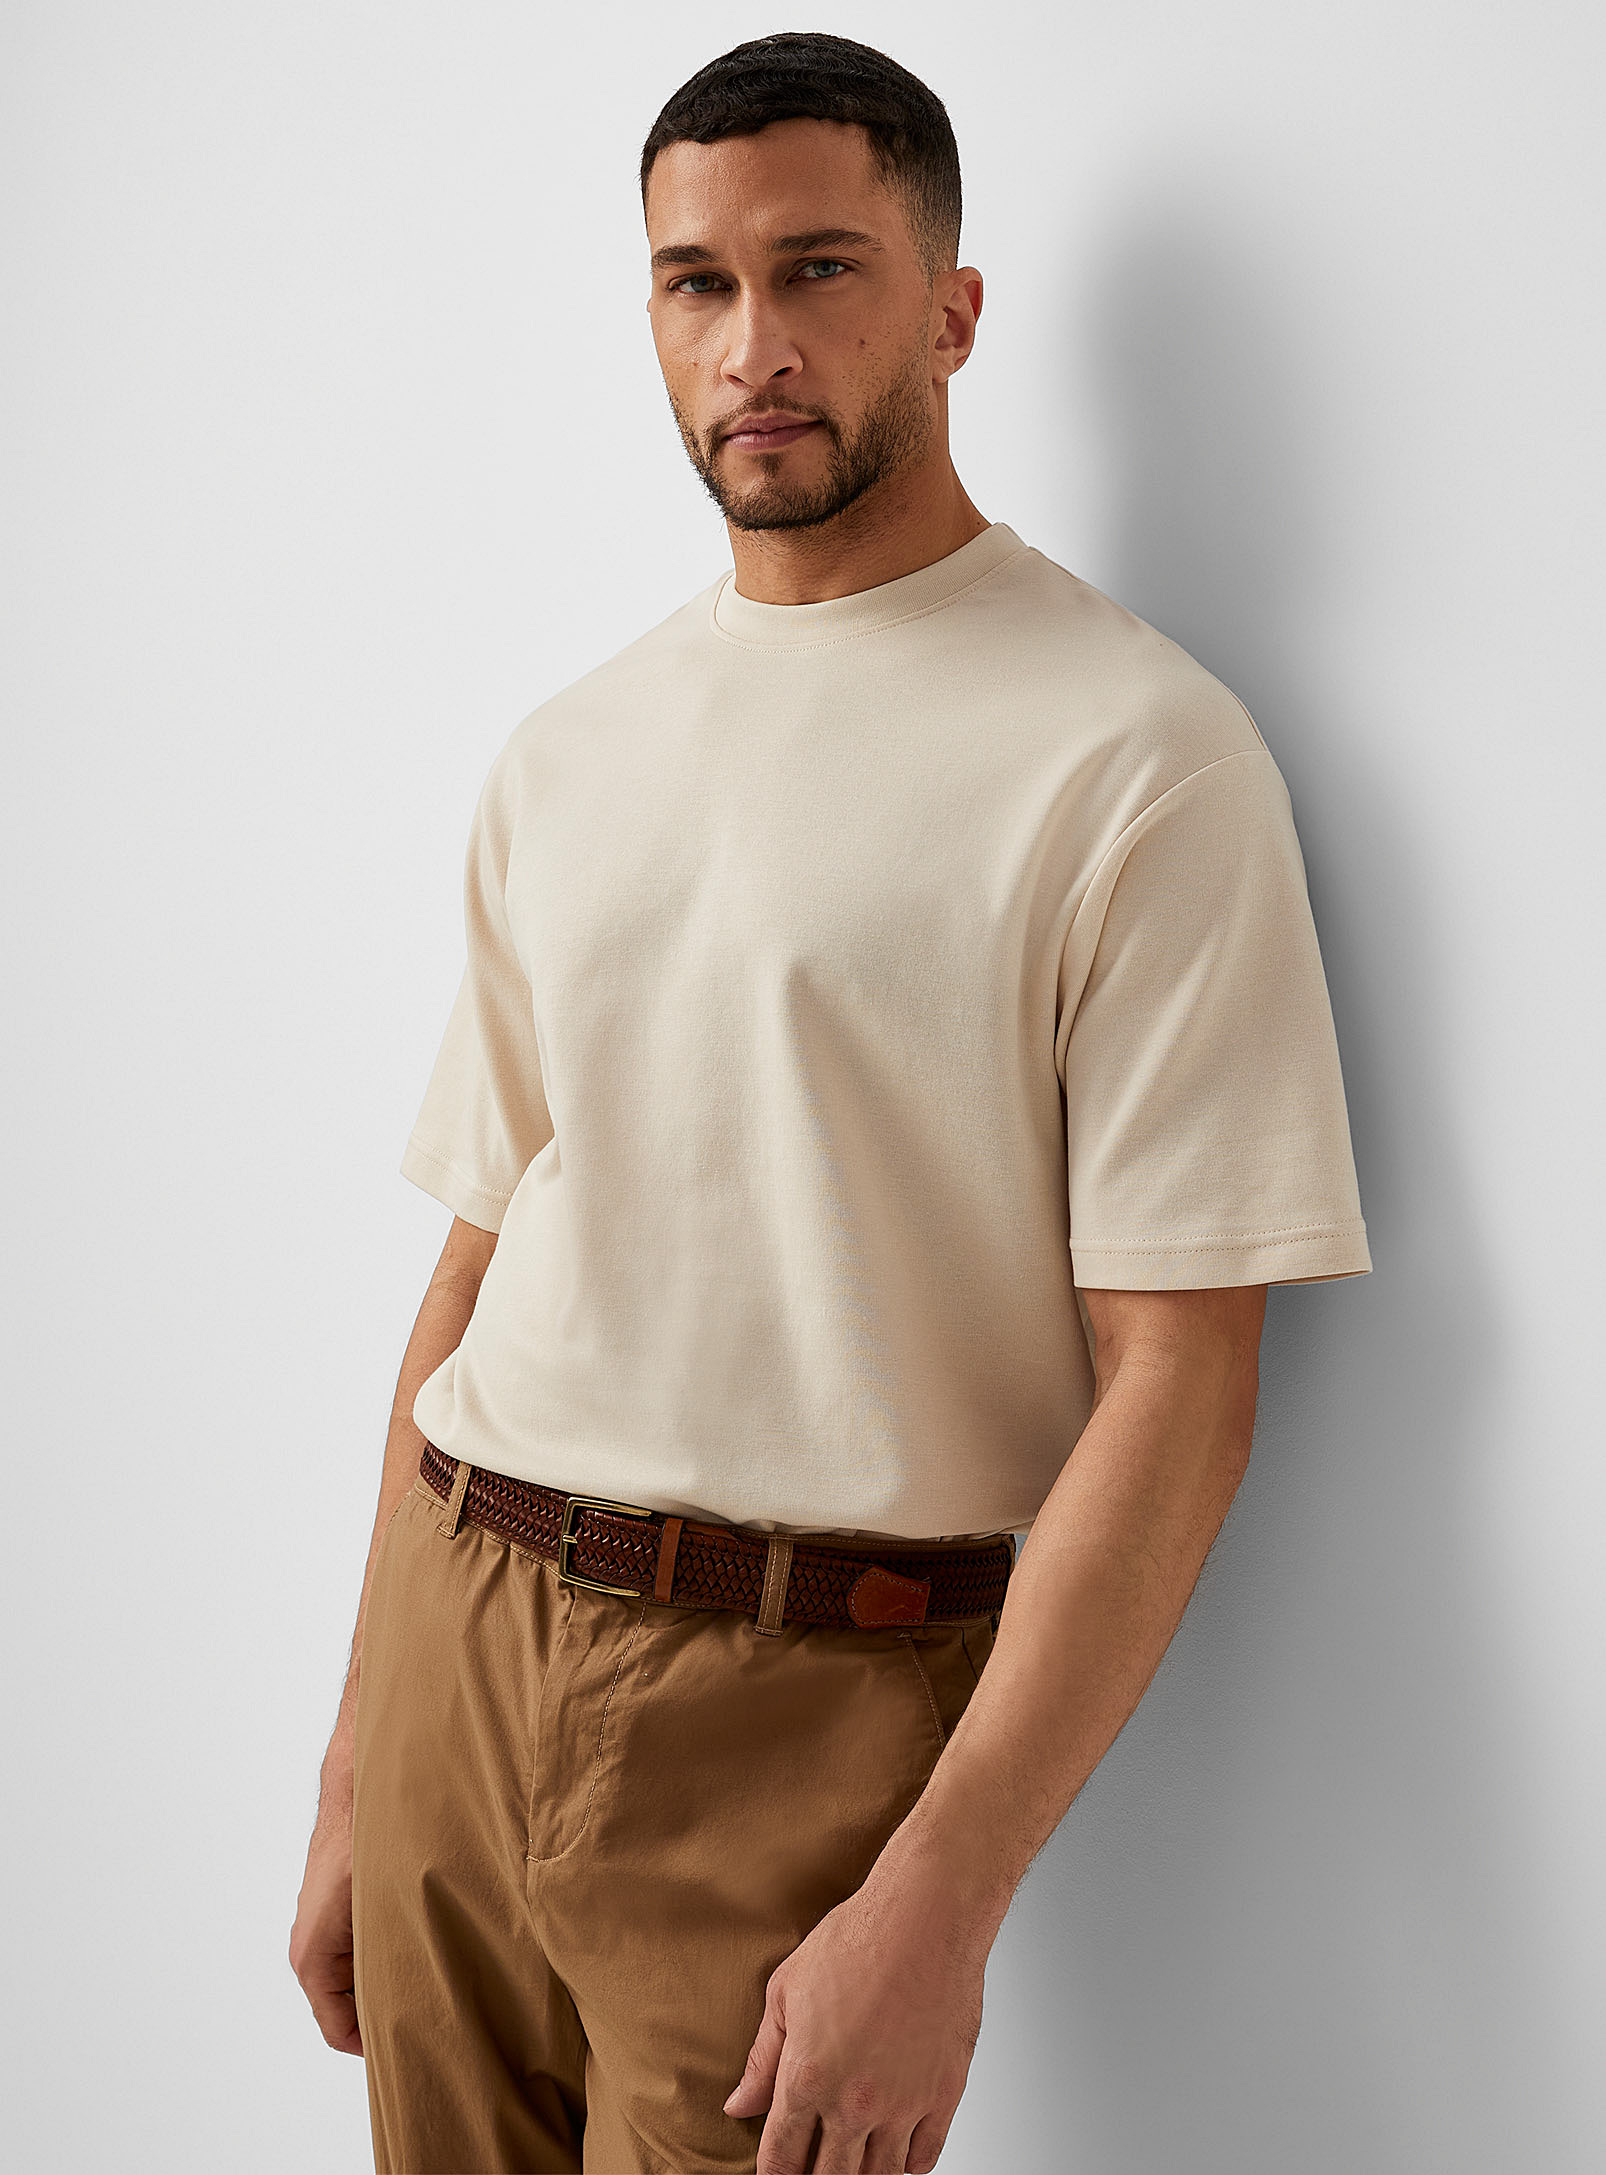 Selected Minimalist T-shirt In Sand